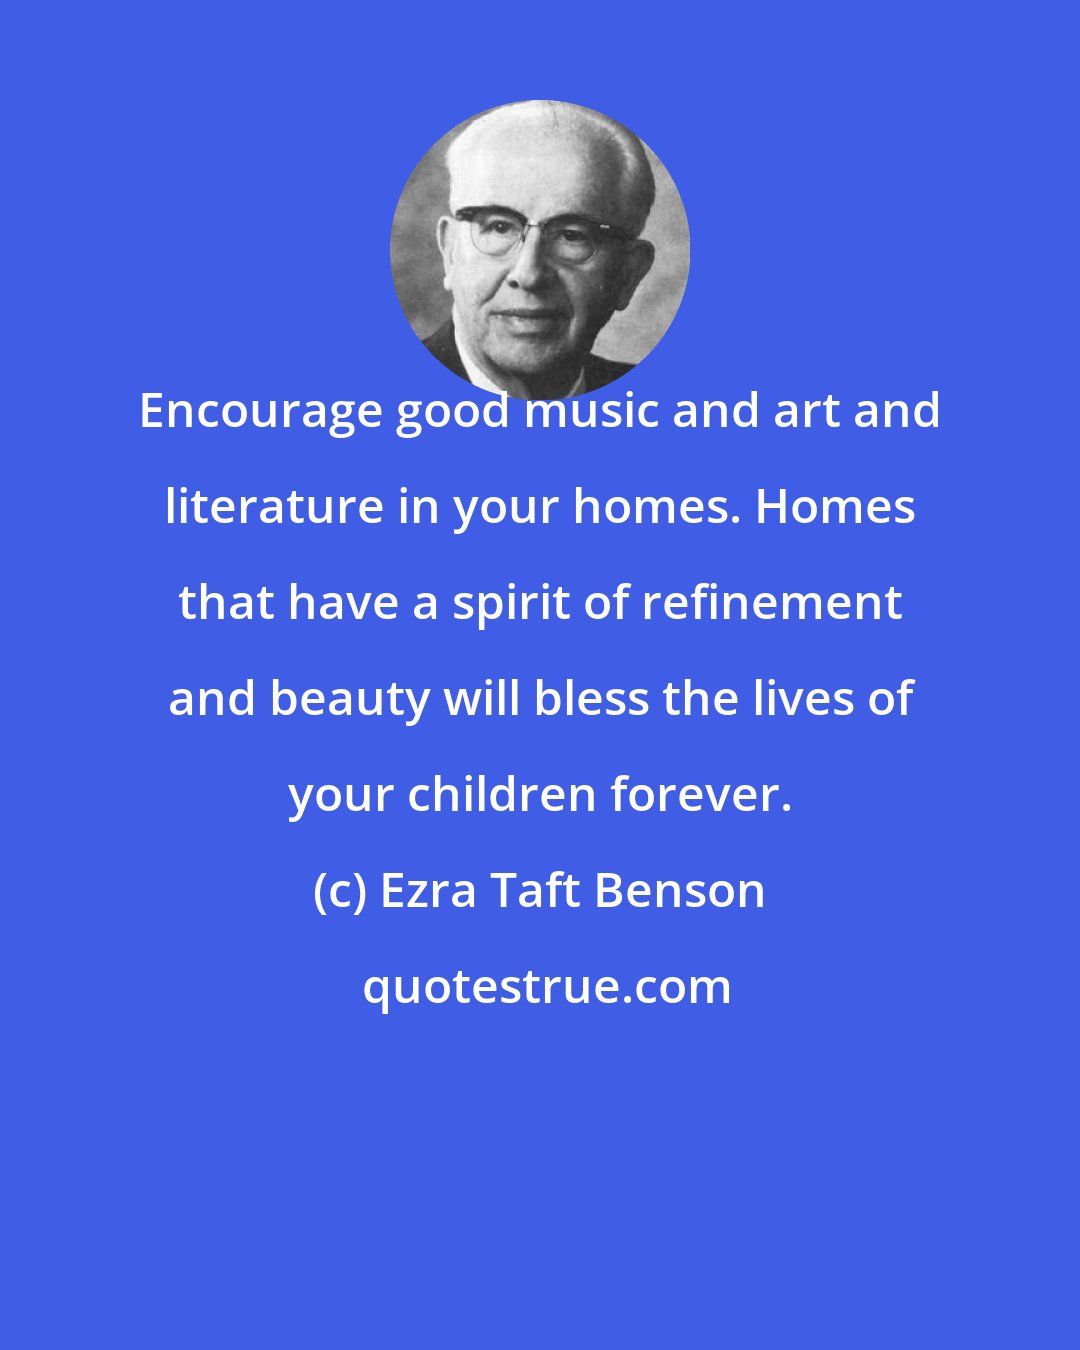 Ezra Taft Benson: Encourage good music and art and literature in your homes. Homes that have a spirit of refinement and beauty will bless the lives of your children forever.